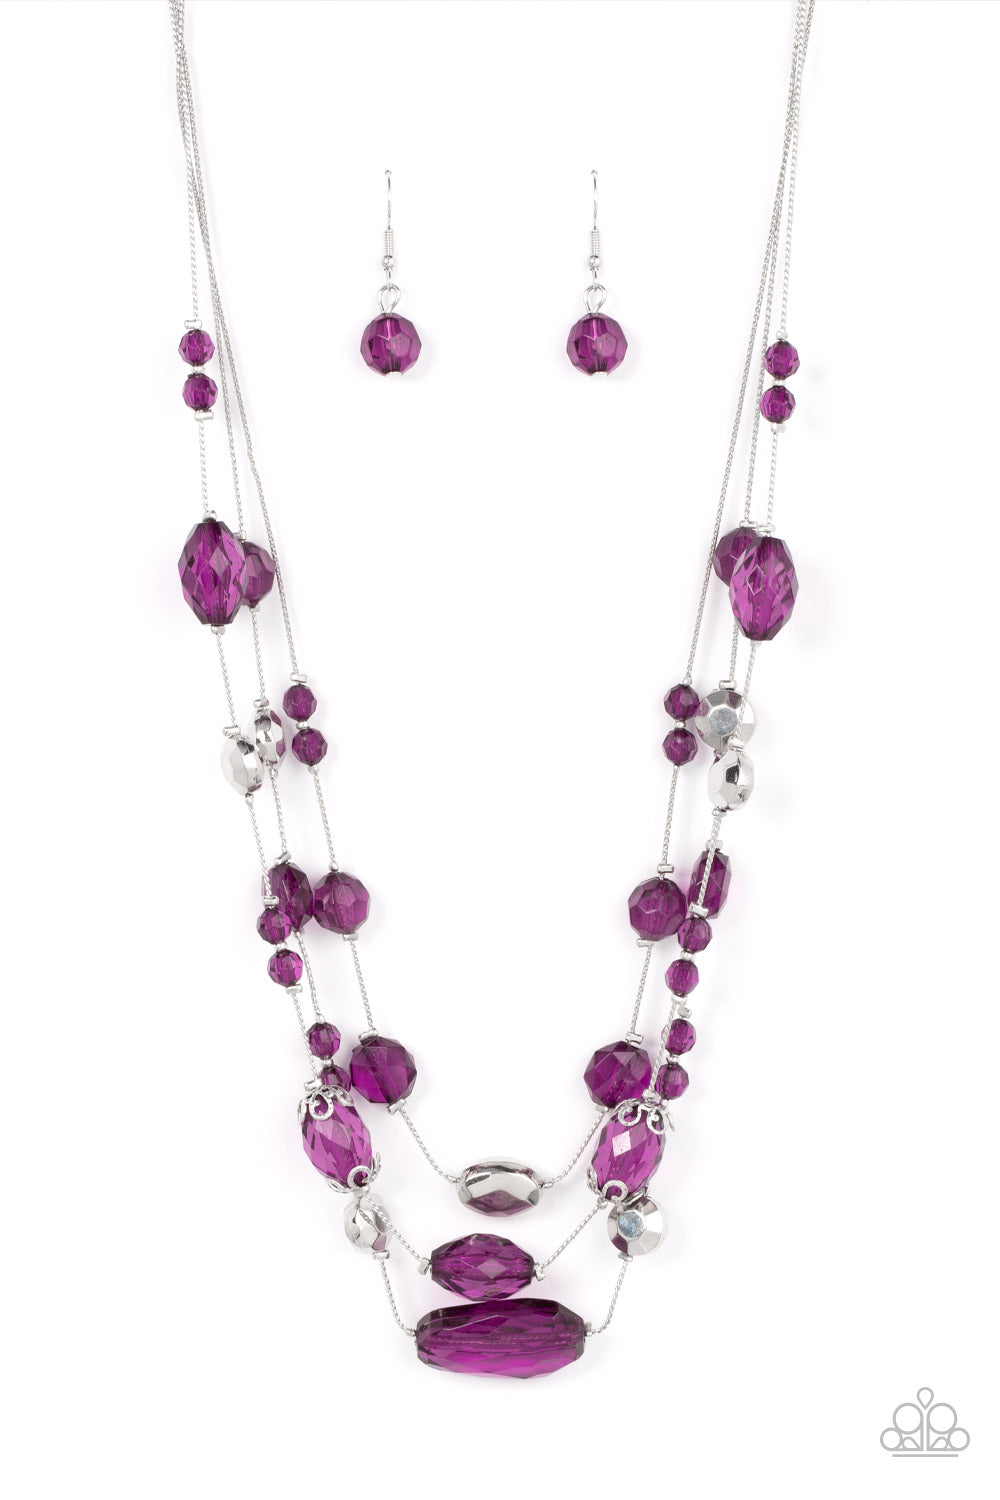 Prismatic Pose Plum Necklace Paparazzi Accessories. Multi Layer $5 Jewelry. Subscribe & Save. 